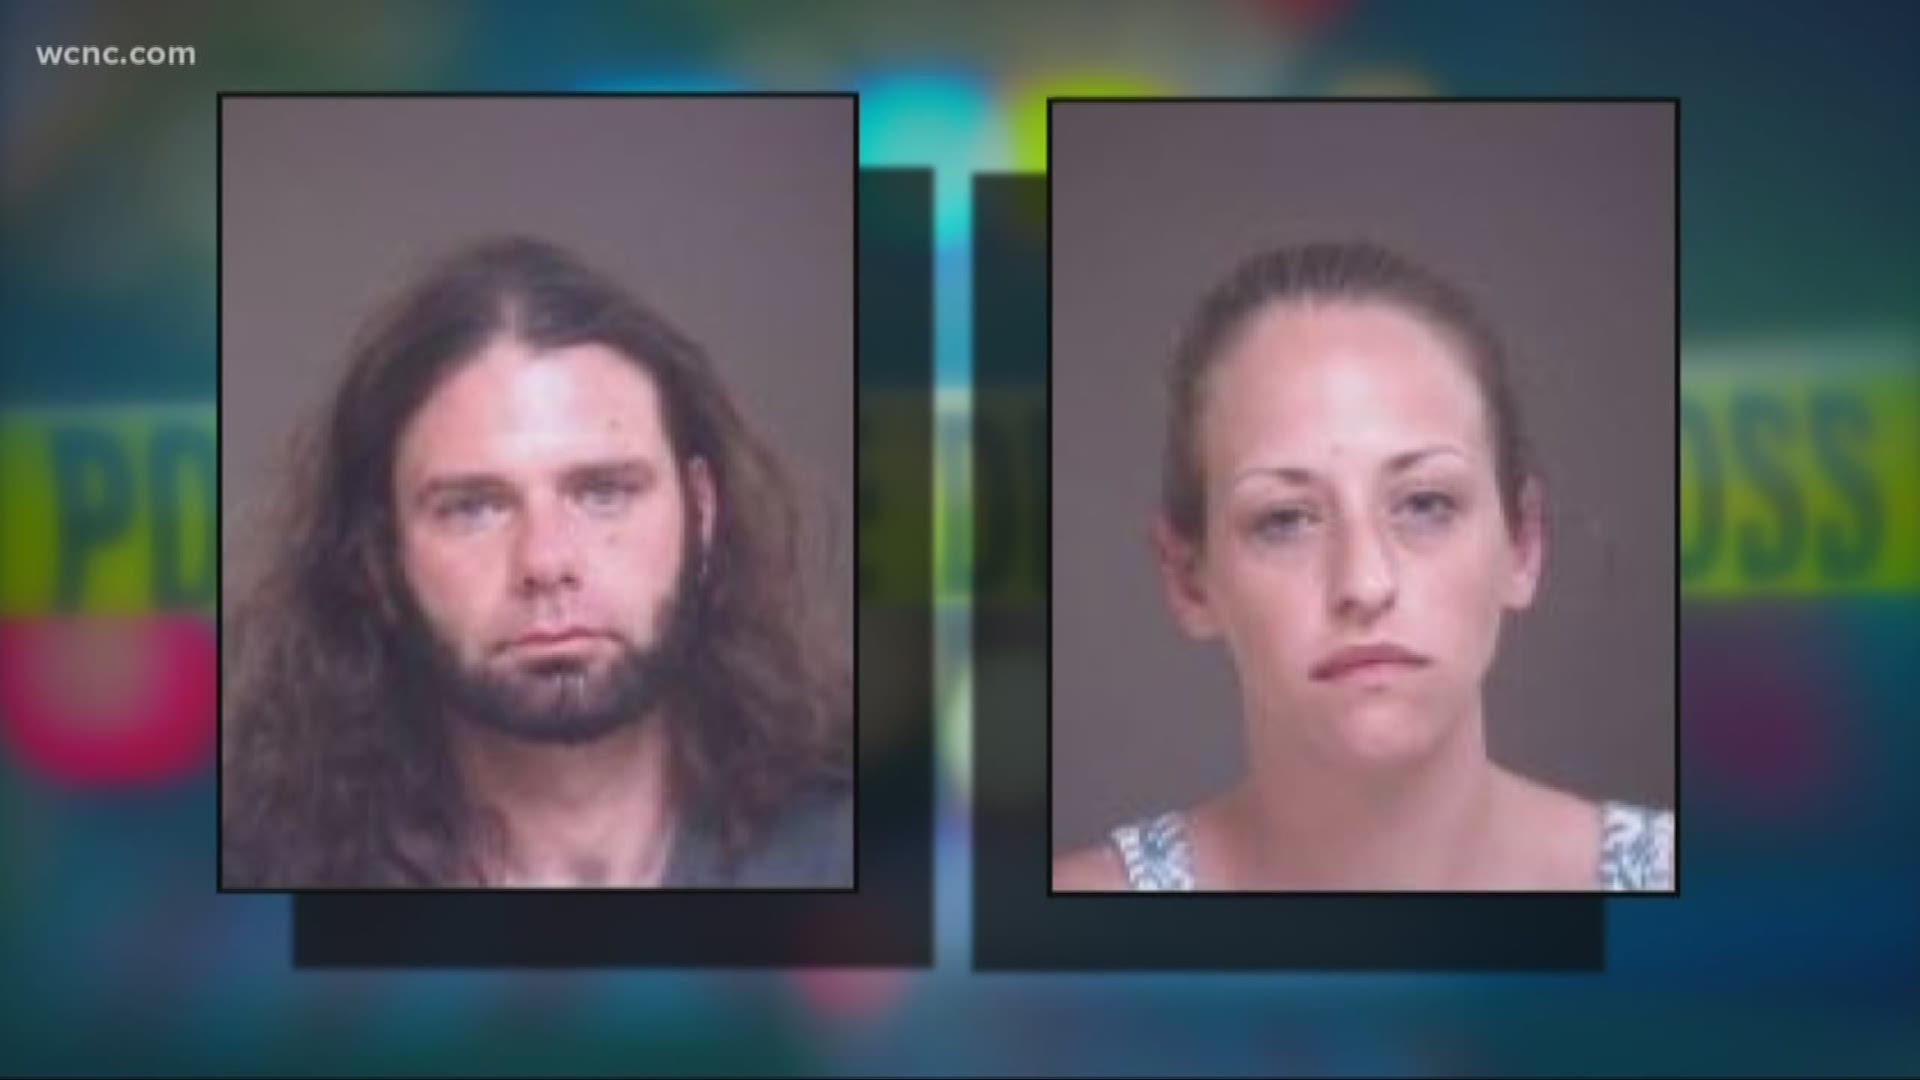 The Lincolnton couple accused of beating a man to death in a parking lot.